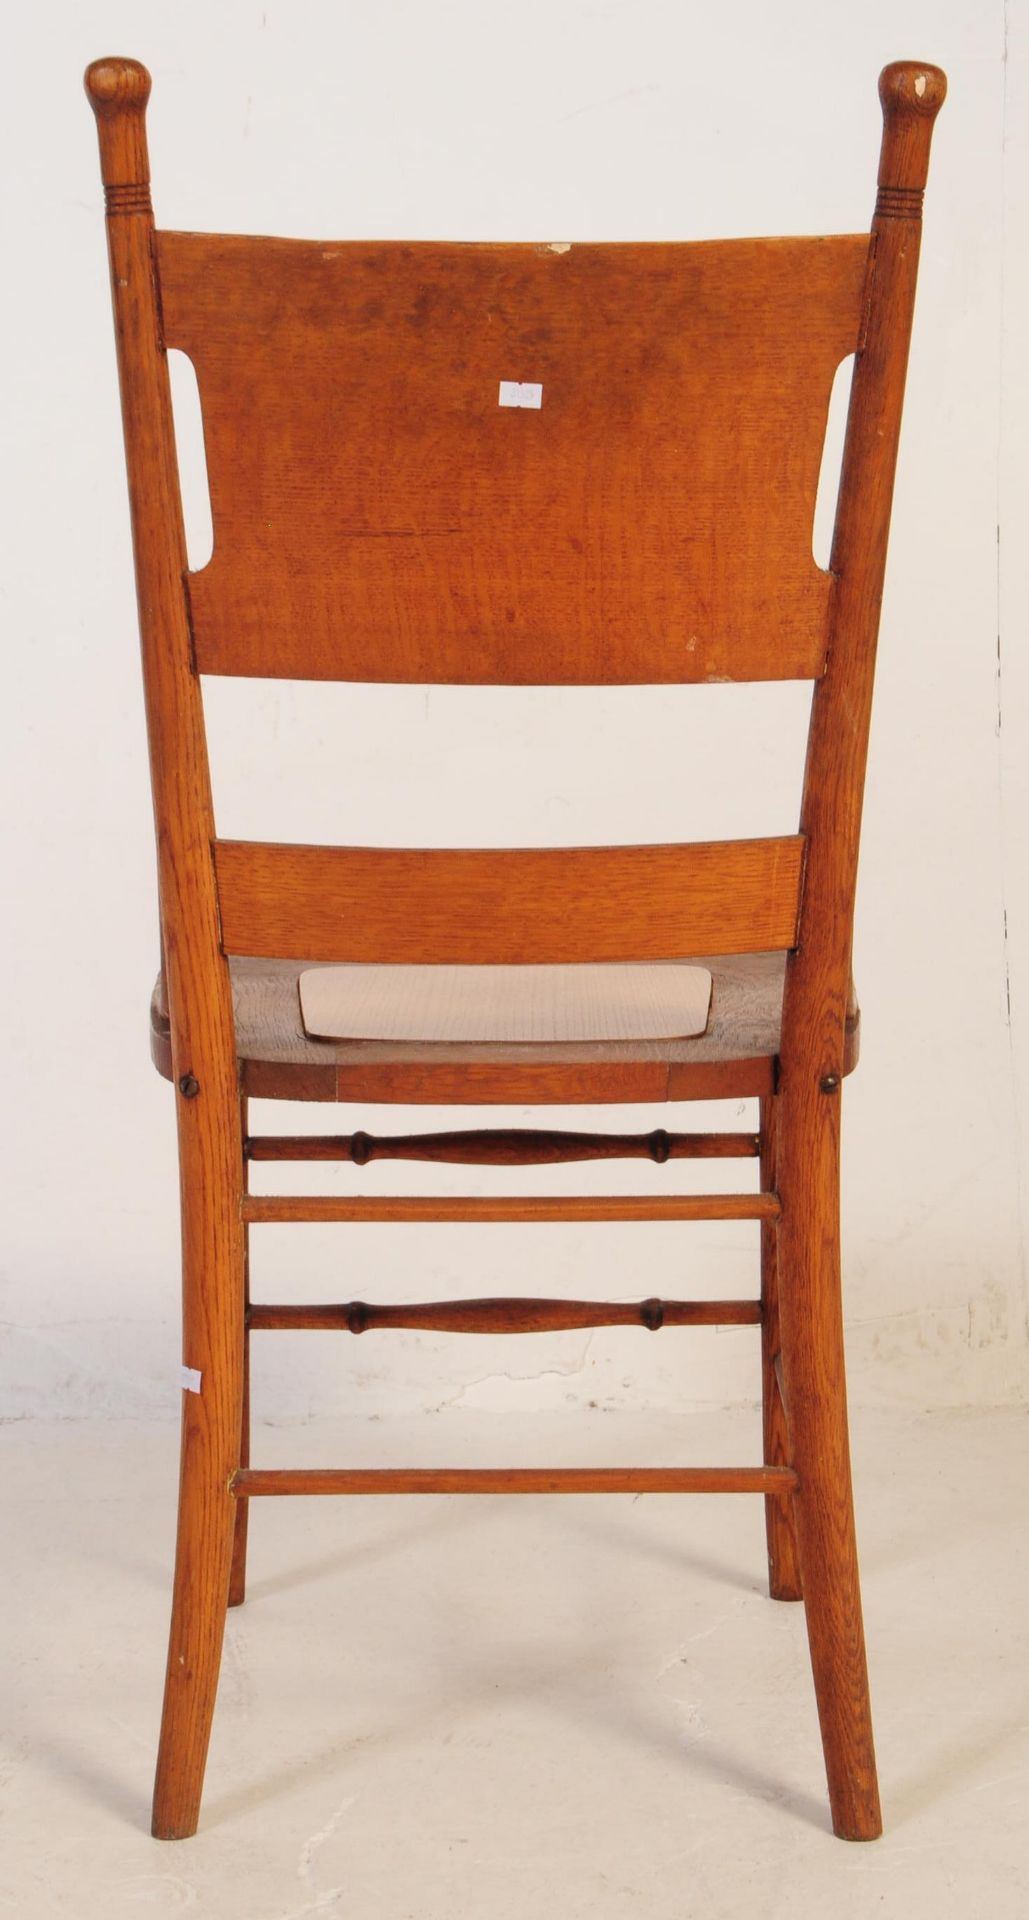 EARLY 20TH CENTURY ARTS & CRAFTS OAK HALL ARMCHAIR - Image 12 of 16